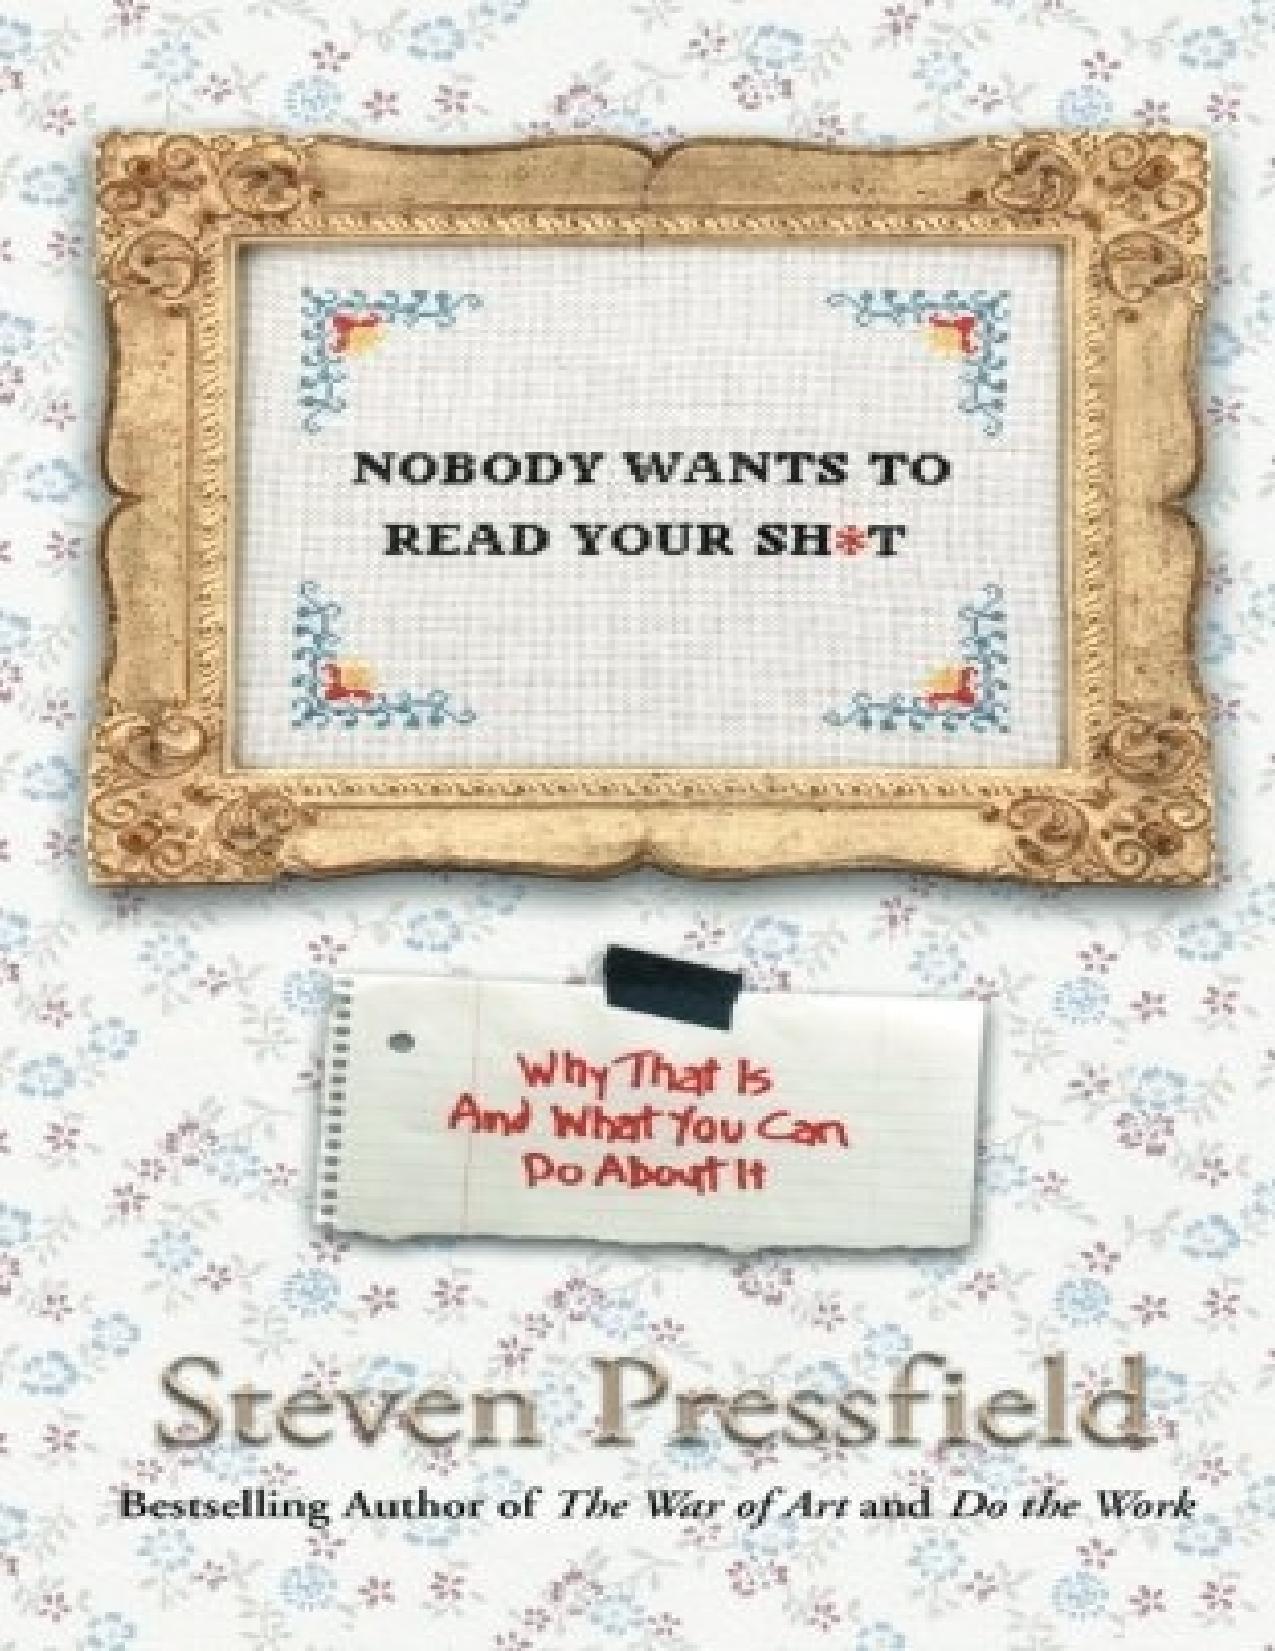 Nobody Wants to Read Your Sh*t: Why That Is And What You Can Do About It by Steven Pressfield Shawn Coyne